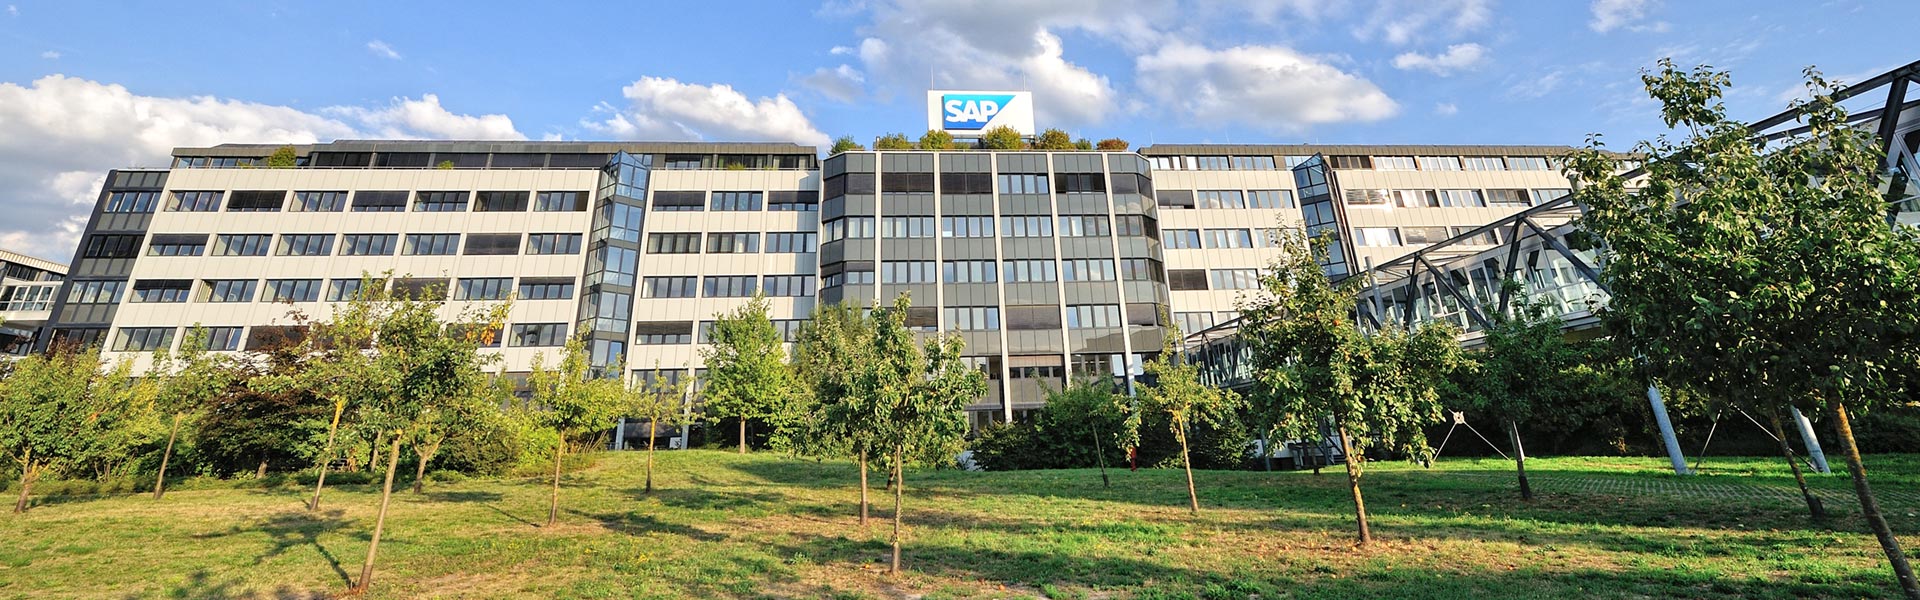 SAP Supervisory Board Appoints Thomas Saueressig as New Executive Board Member to Lead SAP Product Engineering